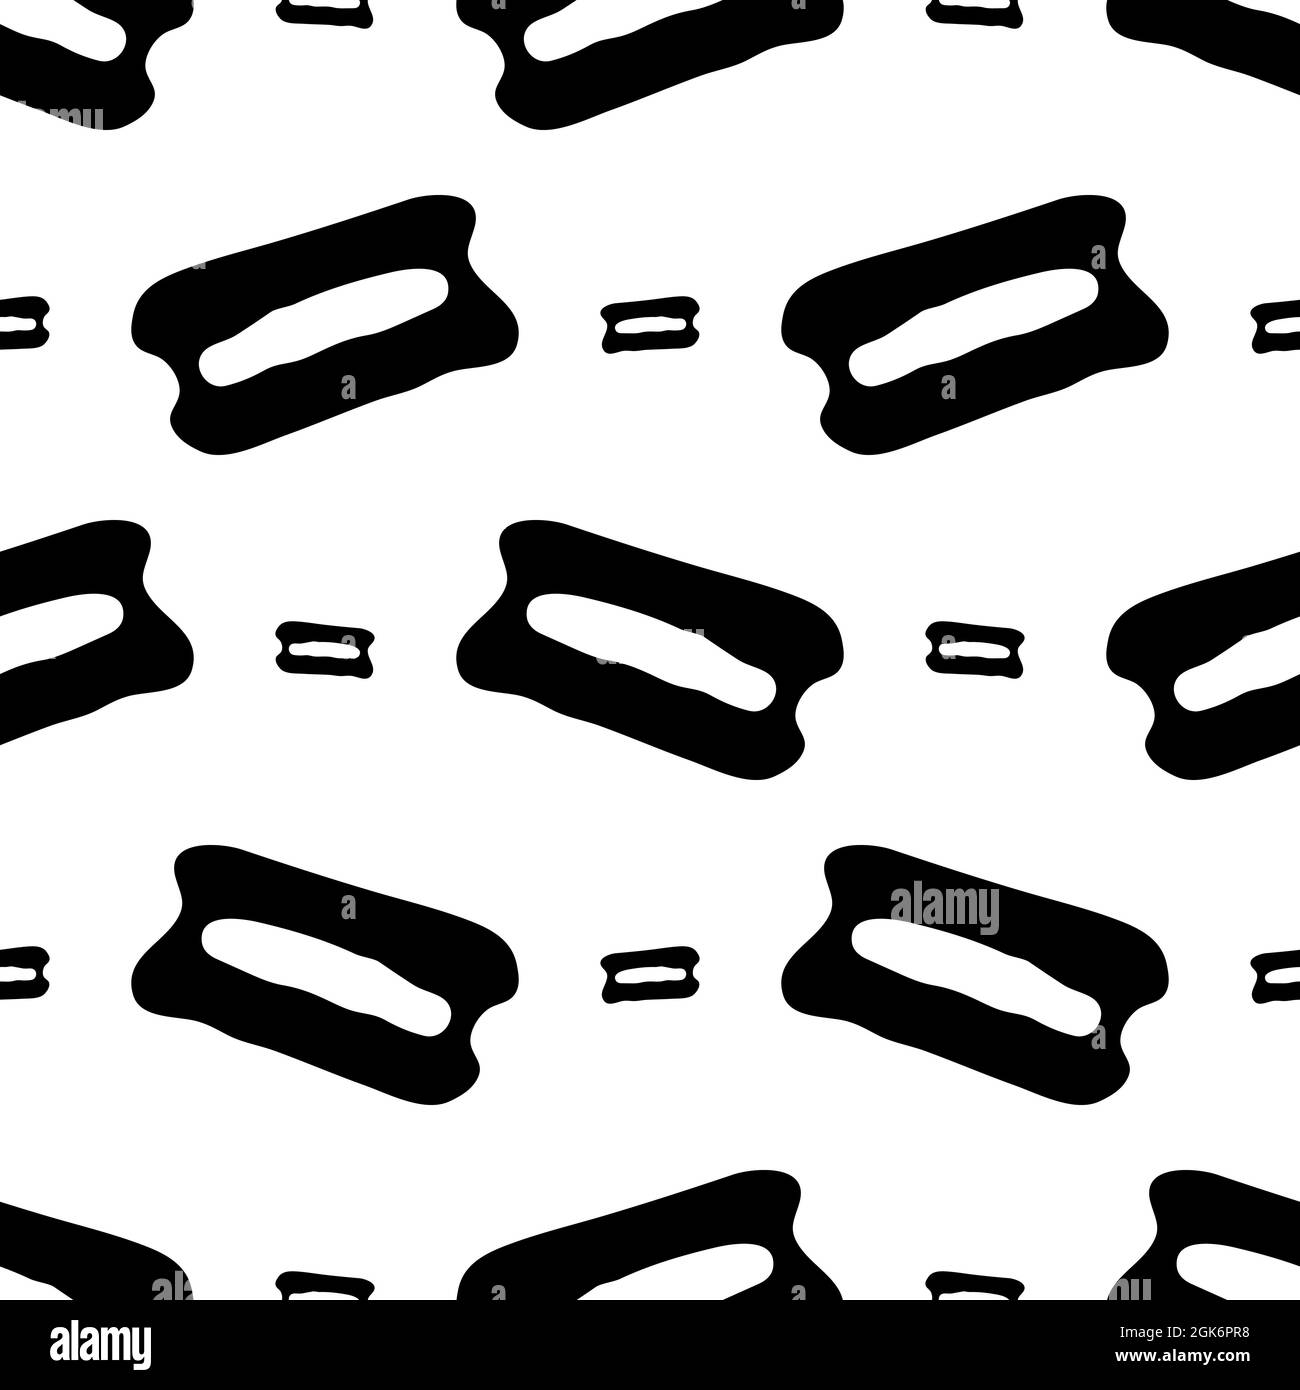 Seamless pattern with hand drawn cookies. Doodle style vector illustration isolated on white background. For interior design, wallpaper, packaging, po Stock Vector